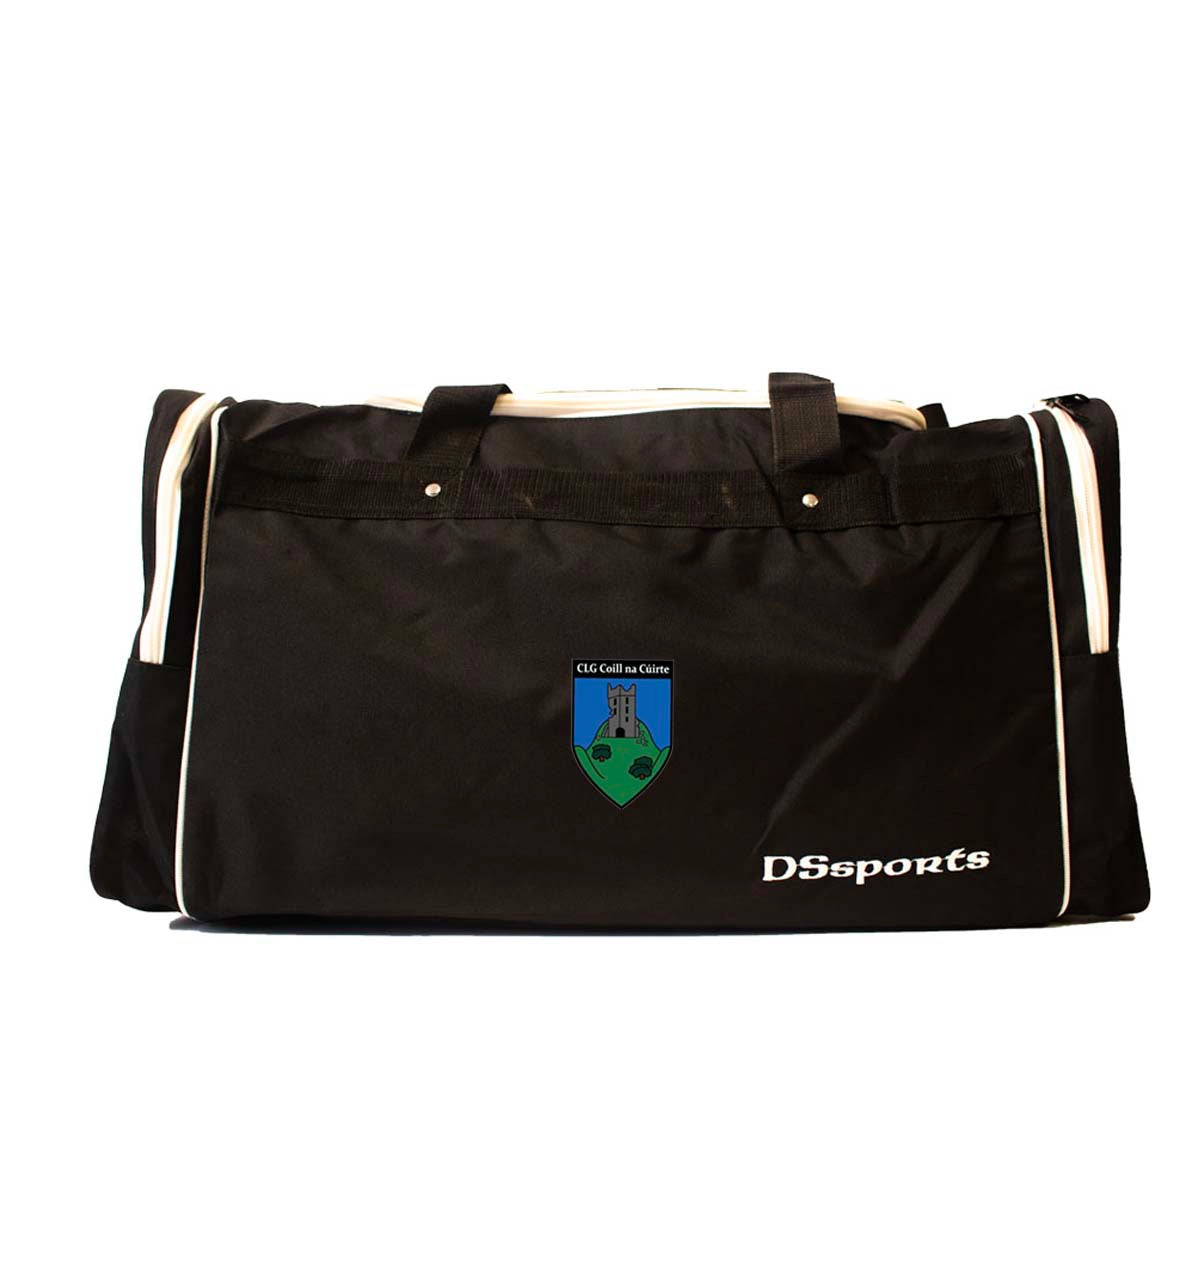 Courtwood GAA - Gearbag 24"